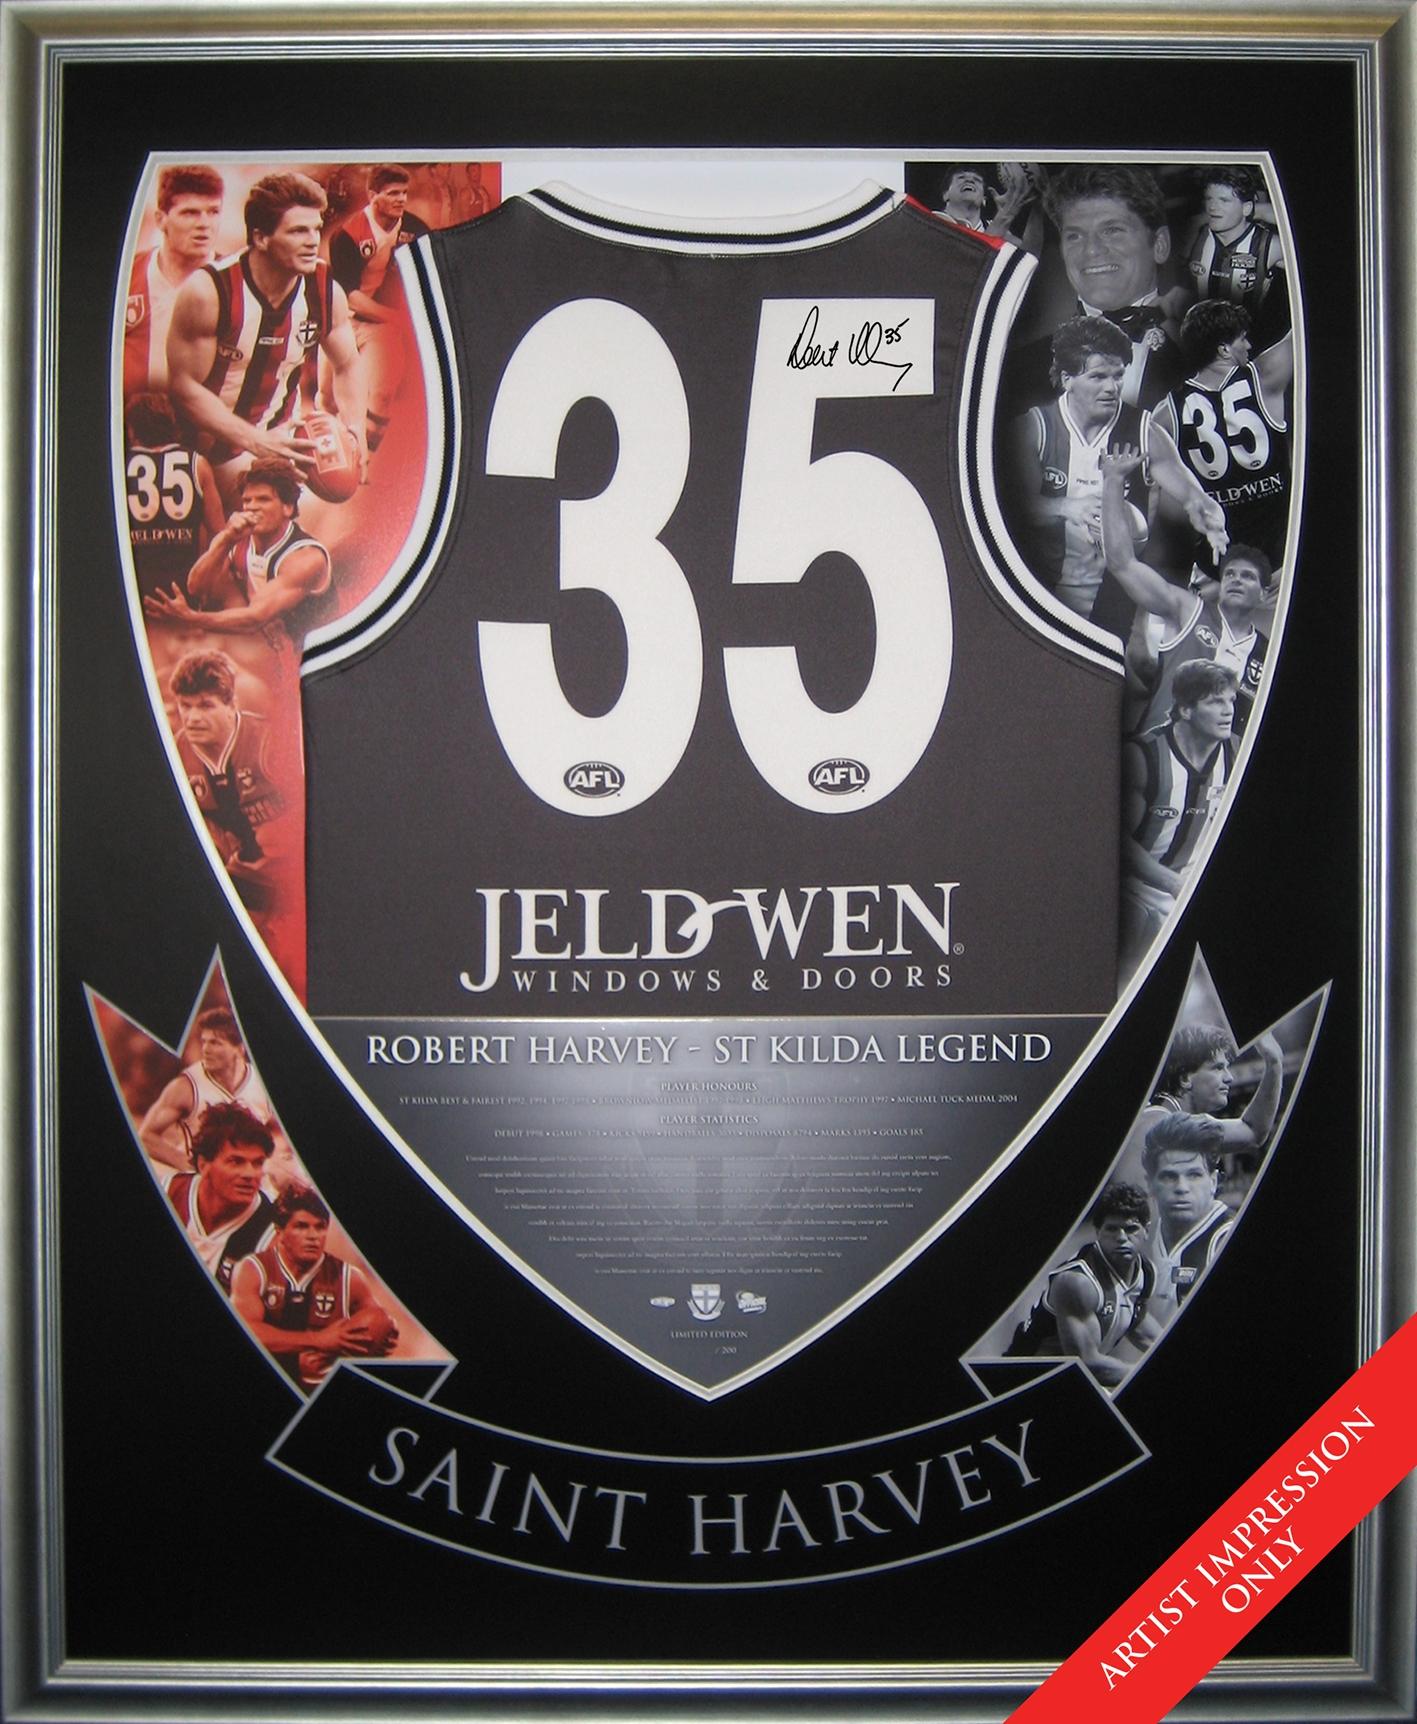 NEW! limited edition with COA Wests Tigers Legends memorabilia frame 